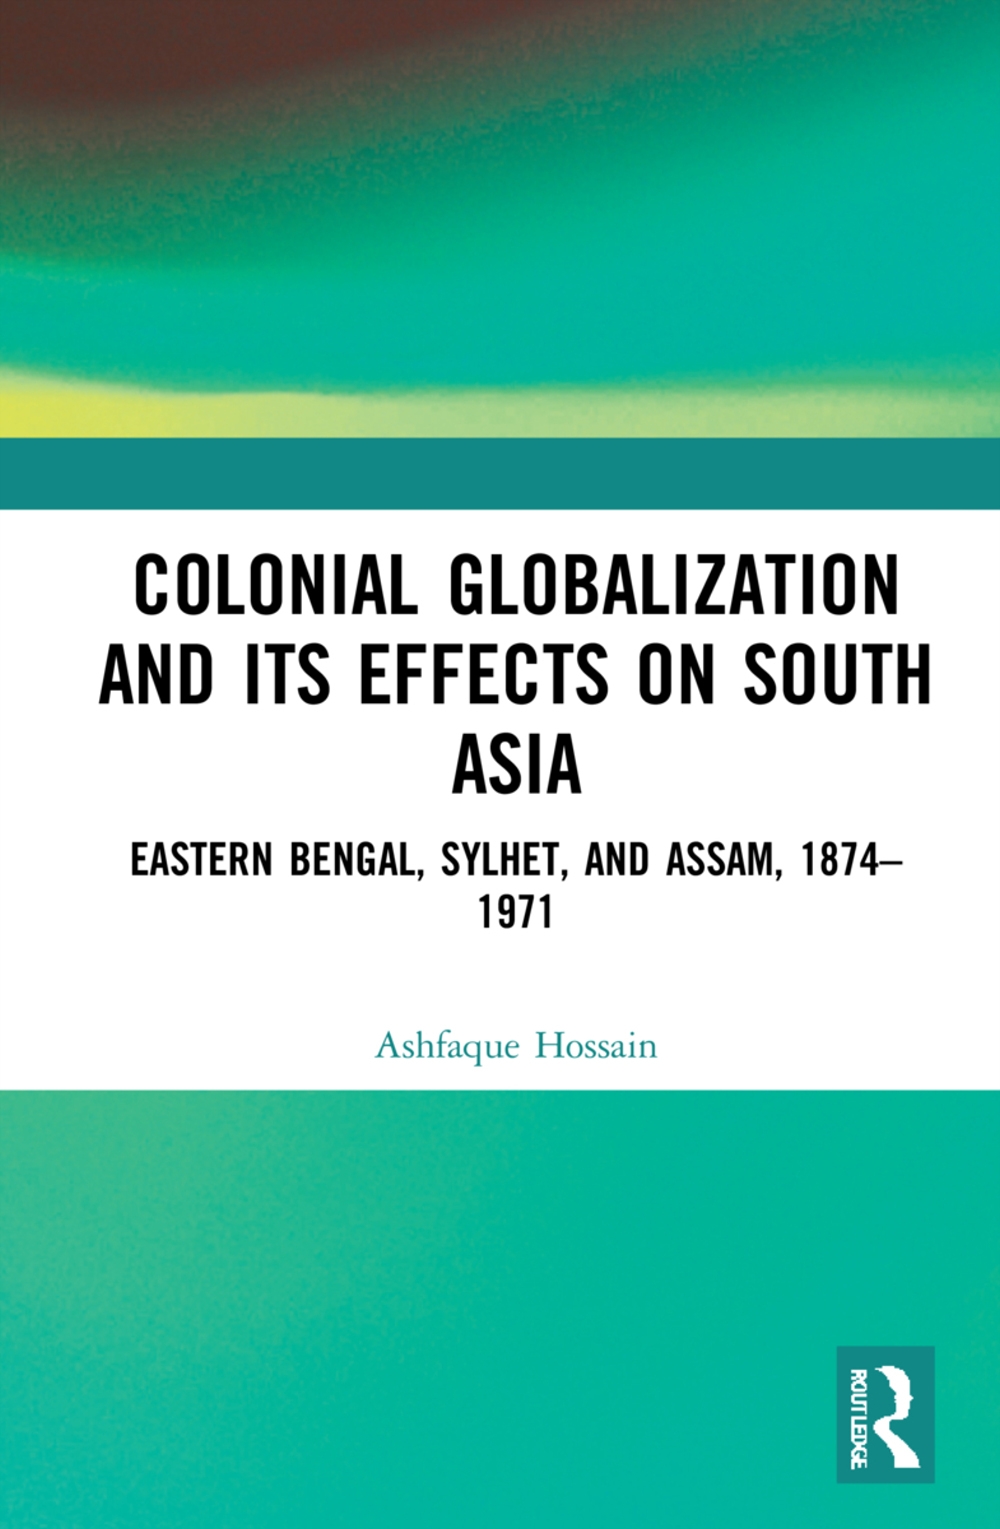 Colonial Globalization and Its Effects on South Asia: Eastern Bengal, Sylhet, and Assam, 1874-1971